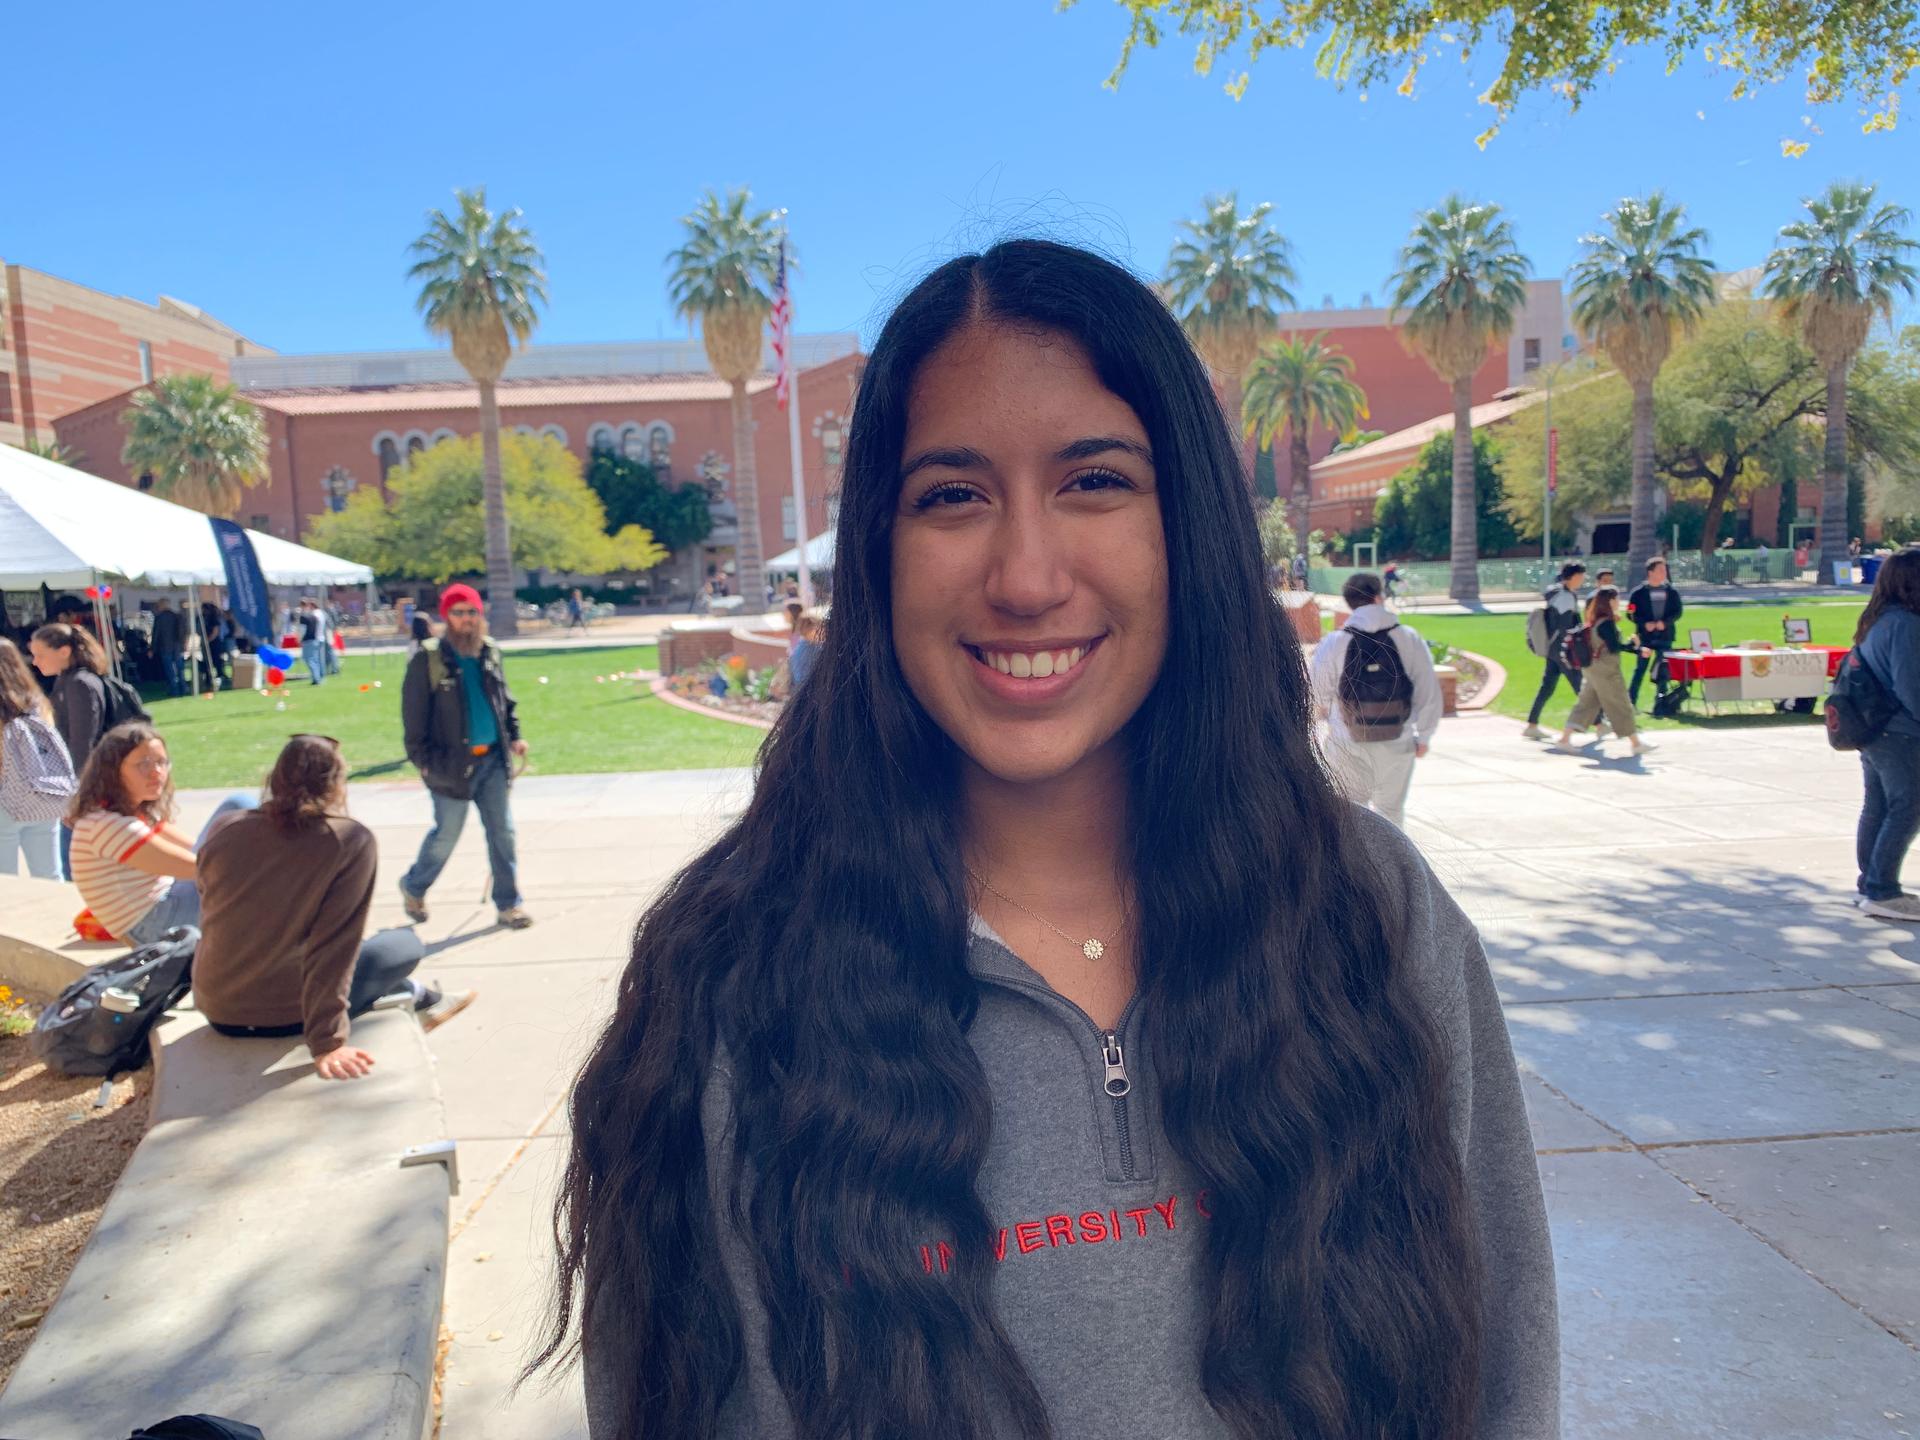 Adela Diaz, who will be a first-time voter in 2020, poses on her campus at the University of Arizona in Tucson.